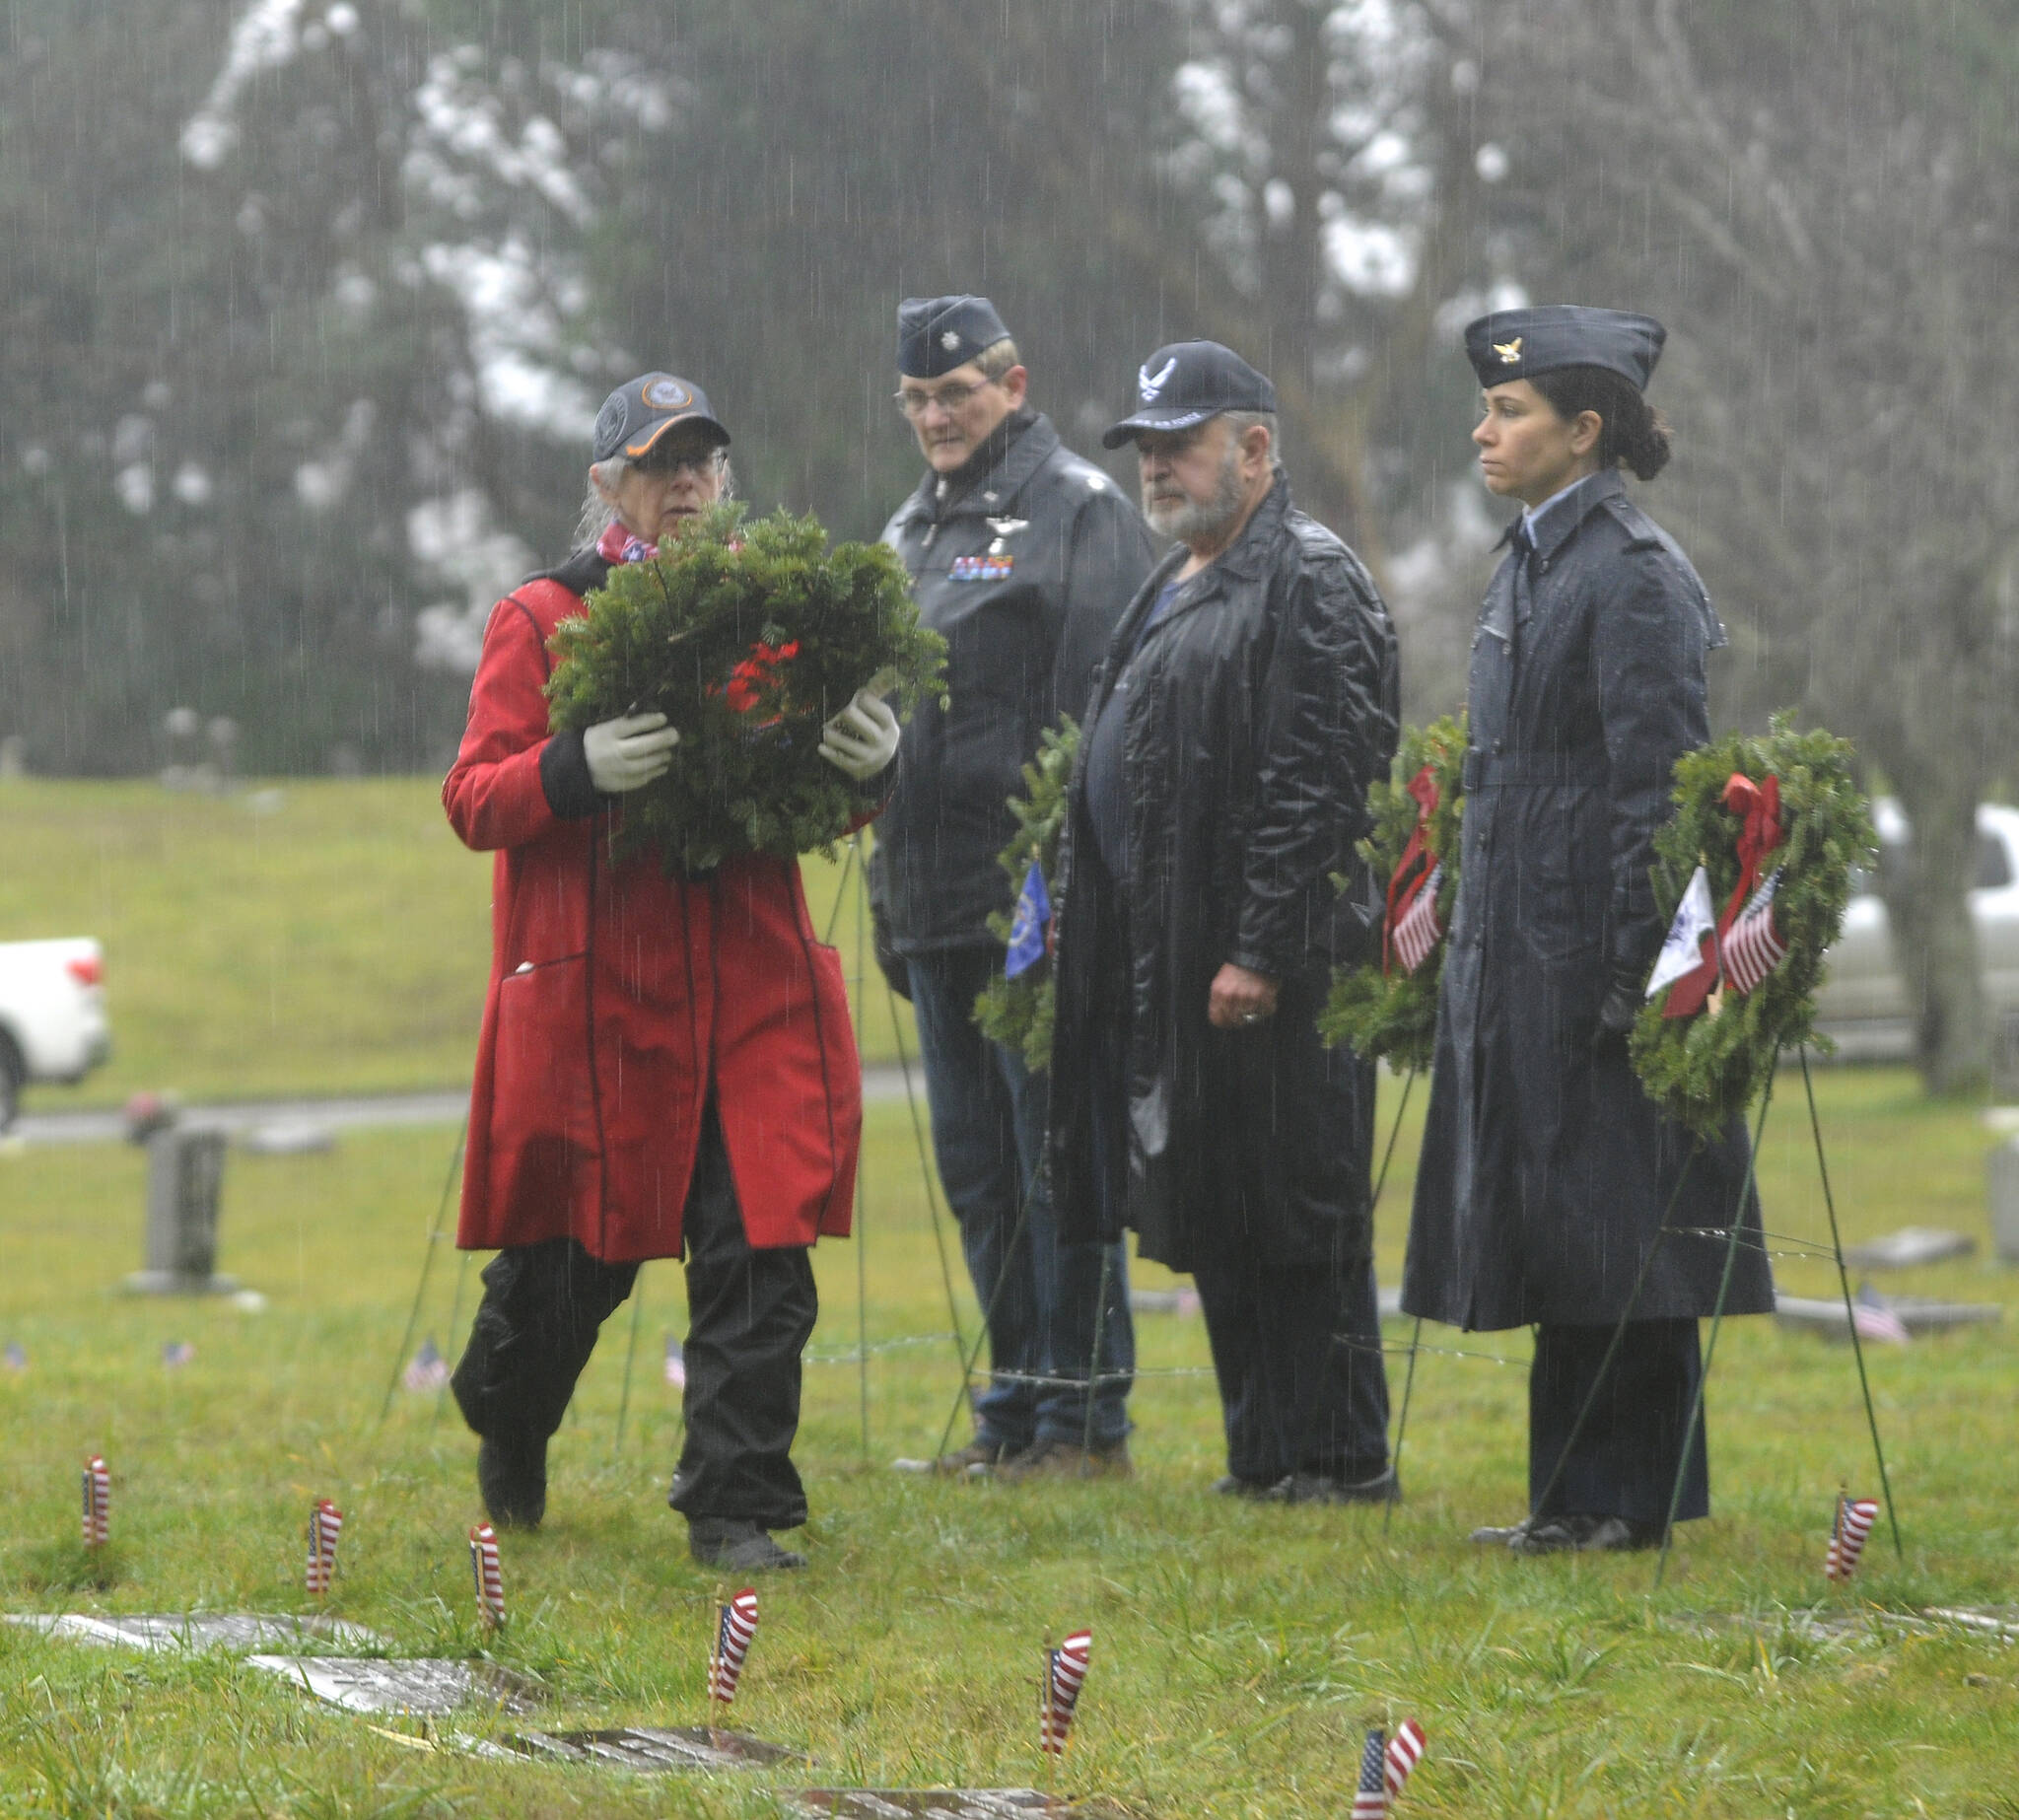 Commander Lorri Gilchrist (ret.) prepares to lay a wreath to honor those veterans who served in the U.S. Navy at Saturday’s Wreaths Across America event. Sequim Gazette photos by Michael Dashiell